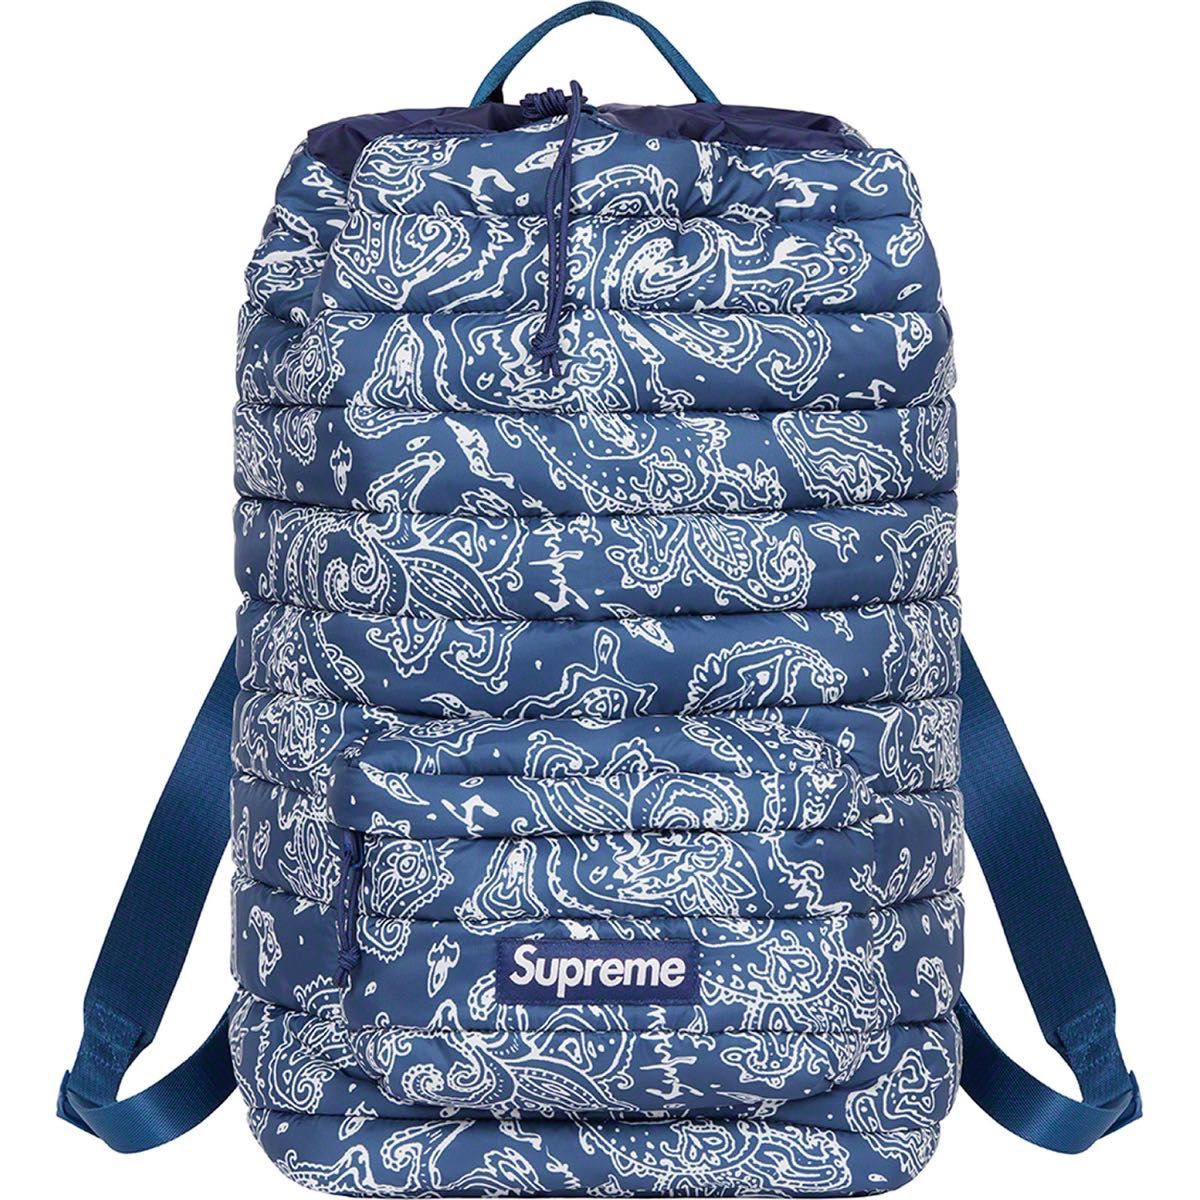 Supreme Puffer Backpack リュック シュプリーム バックパック｜PayPay